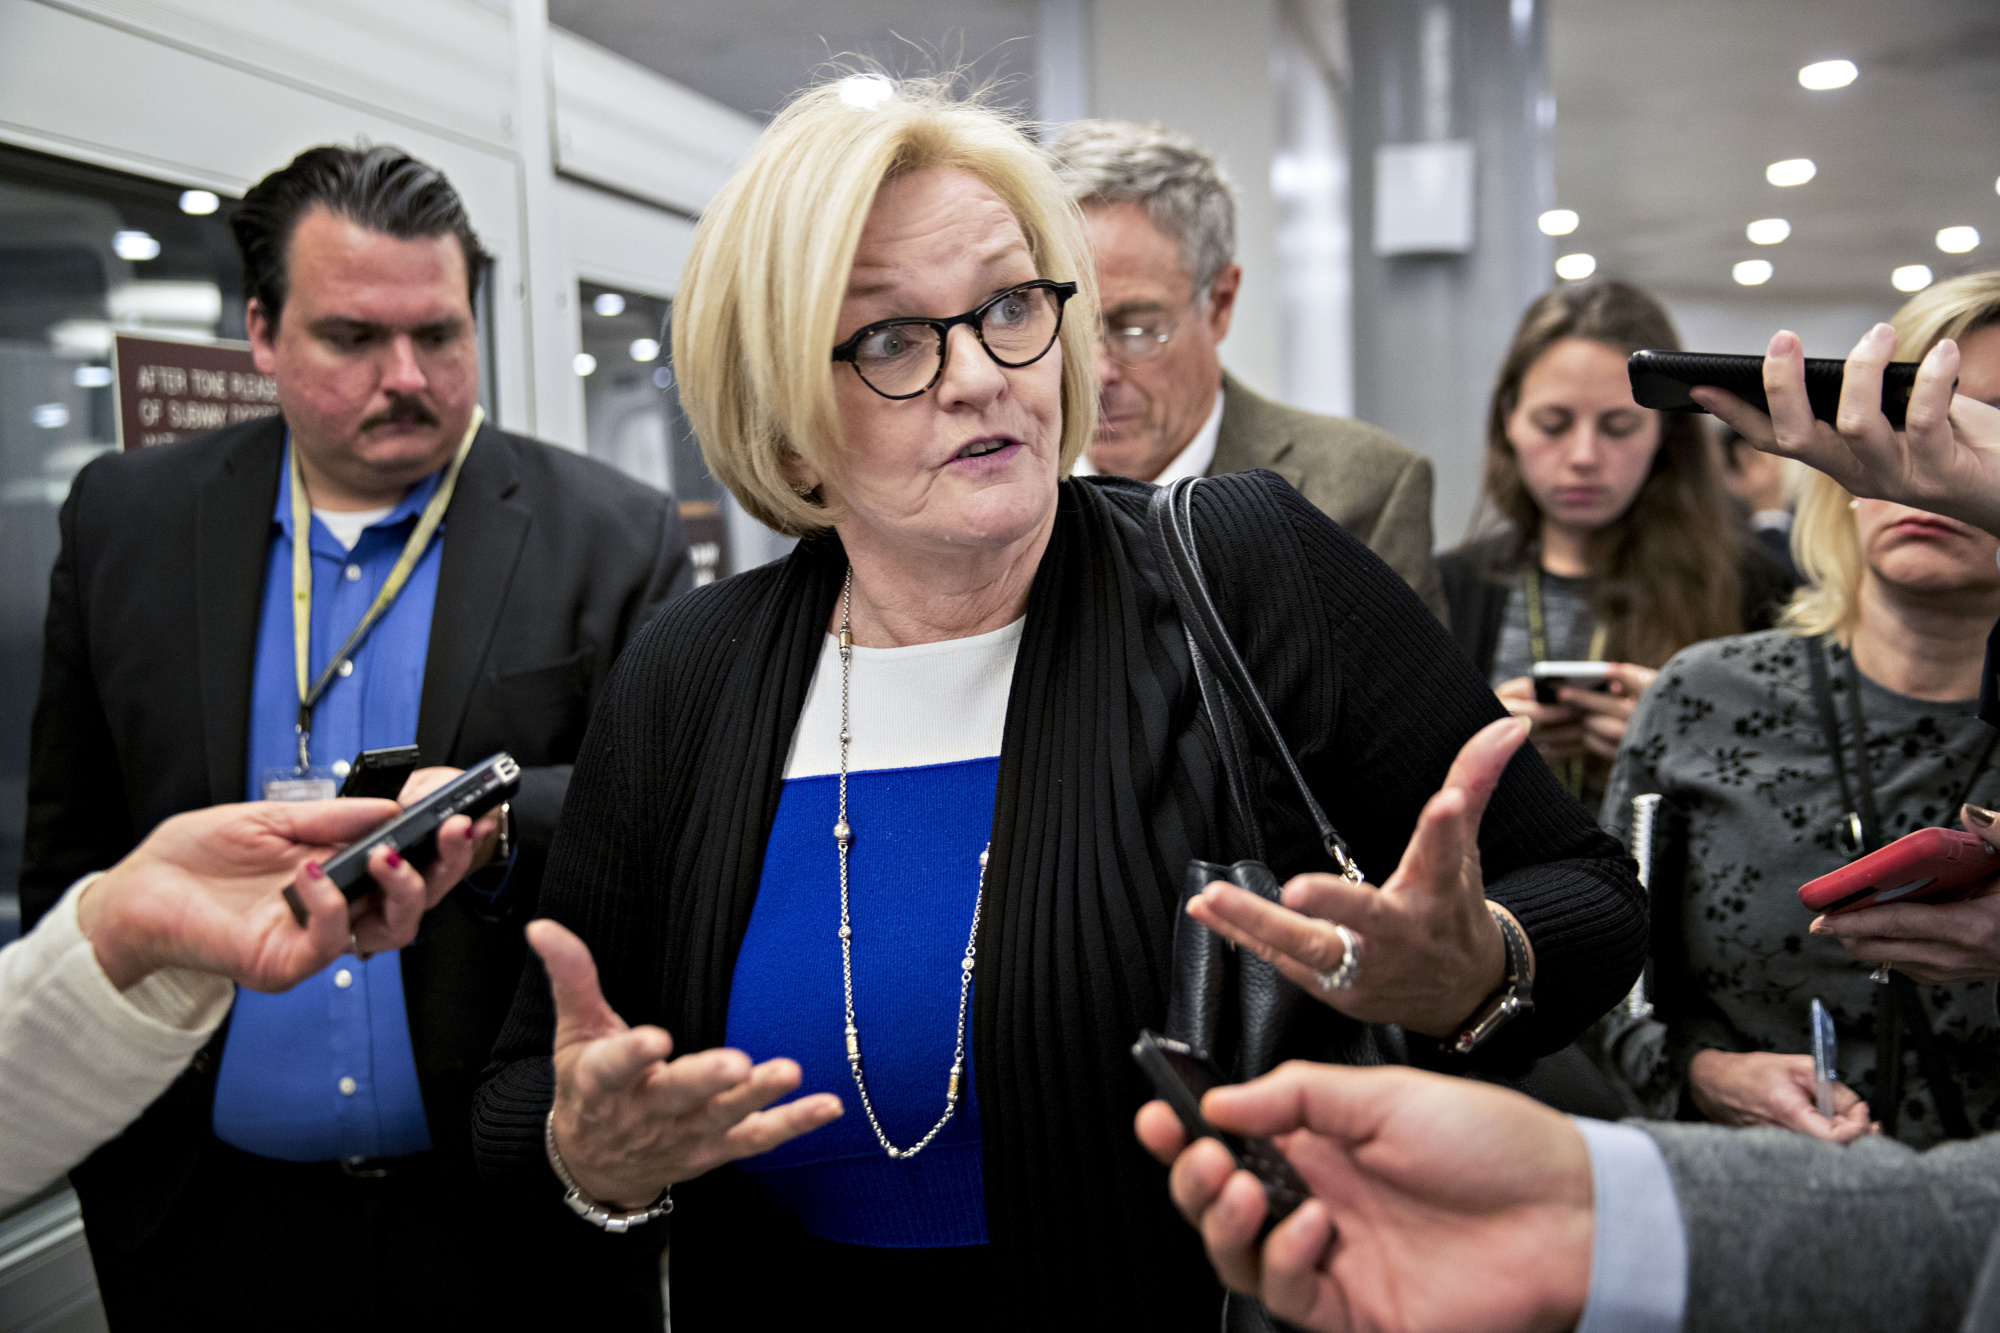 Among the Democratic incumbents in pro-Trump states, Senator Claire McCaskill of Missouri raised the most during the quarter.